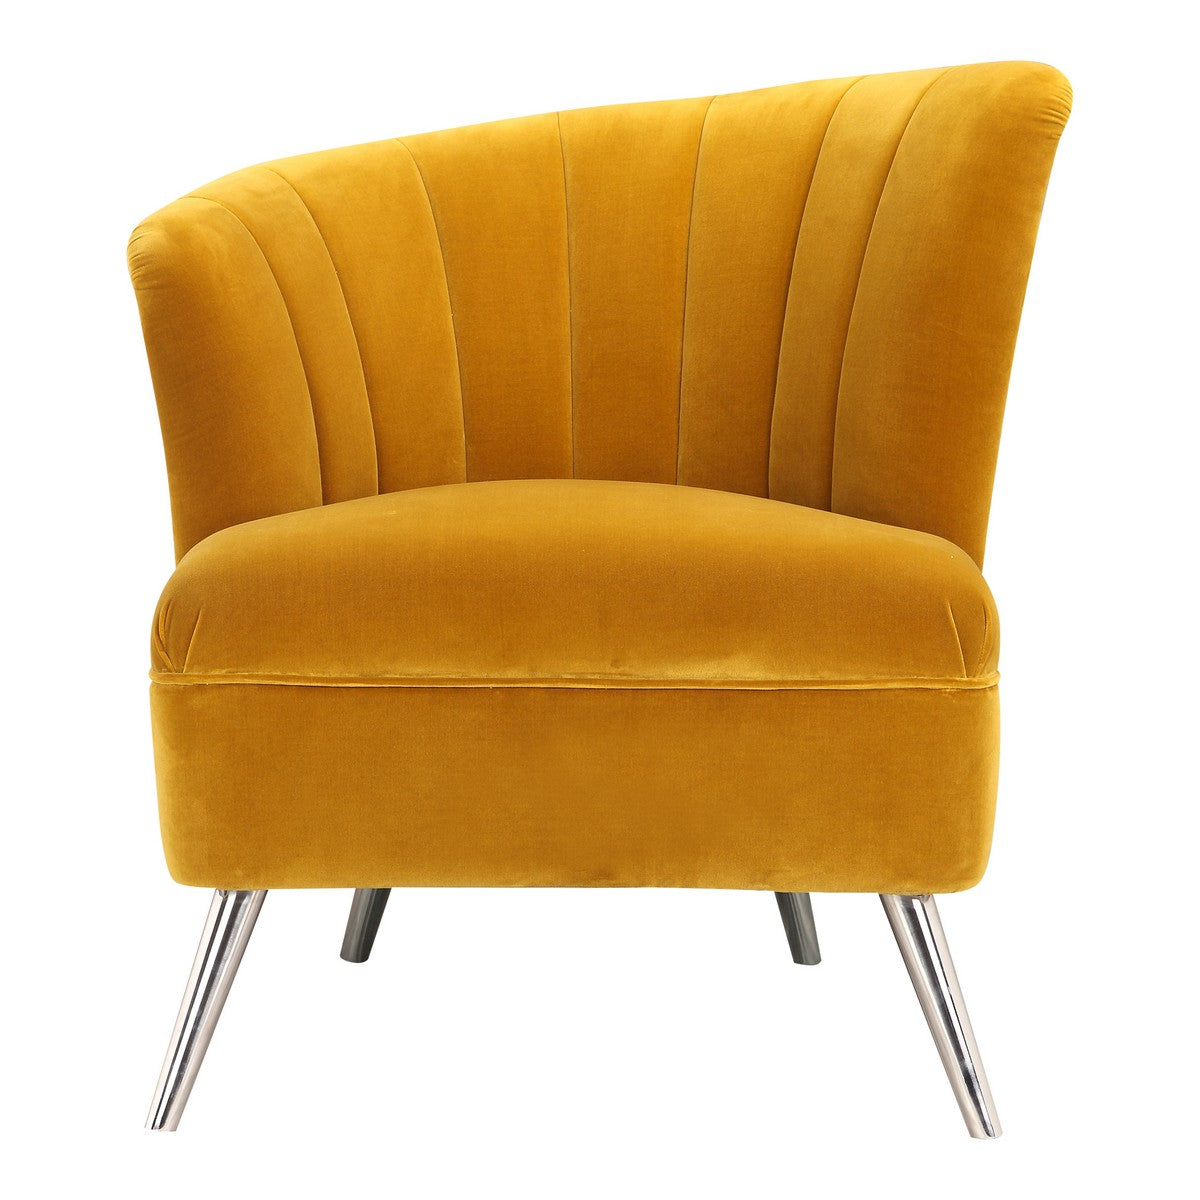 Moe's Home Collection Layan Accent Chair Left Yellow - ME-1043-09 - Moe's Home Collection - lounge chairs - Minimal And Modern - 1